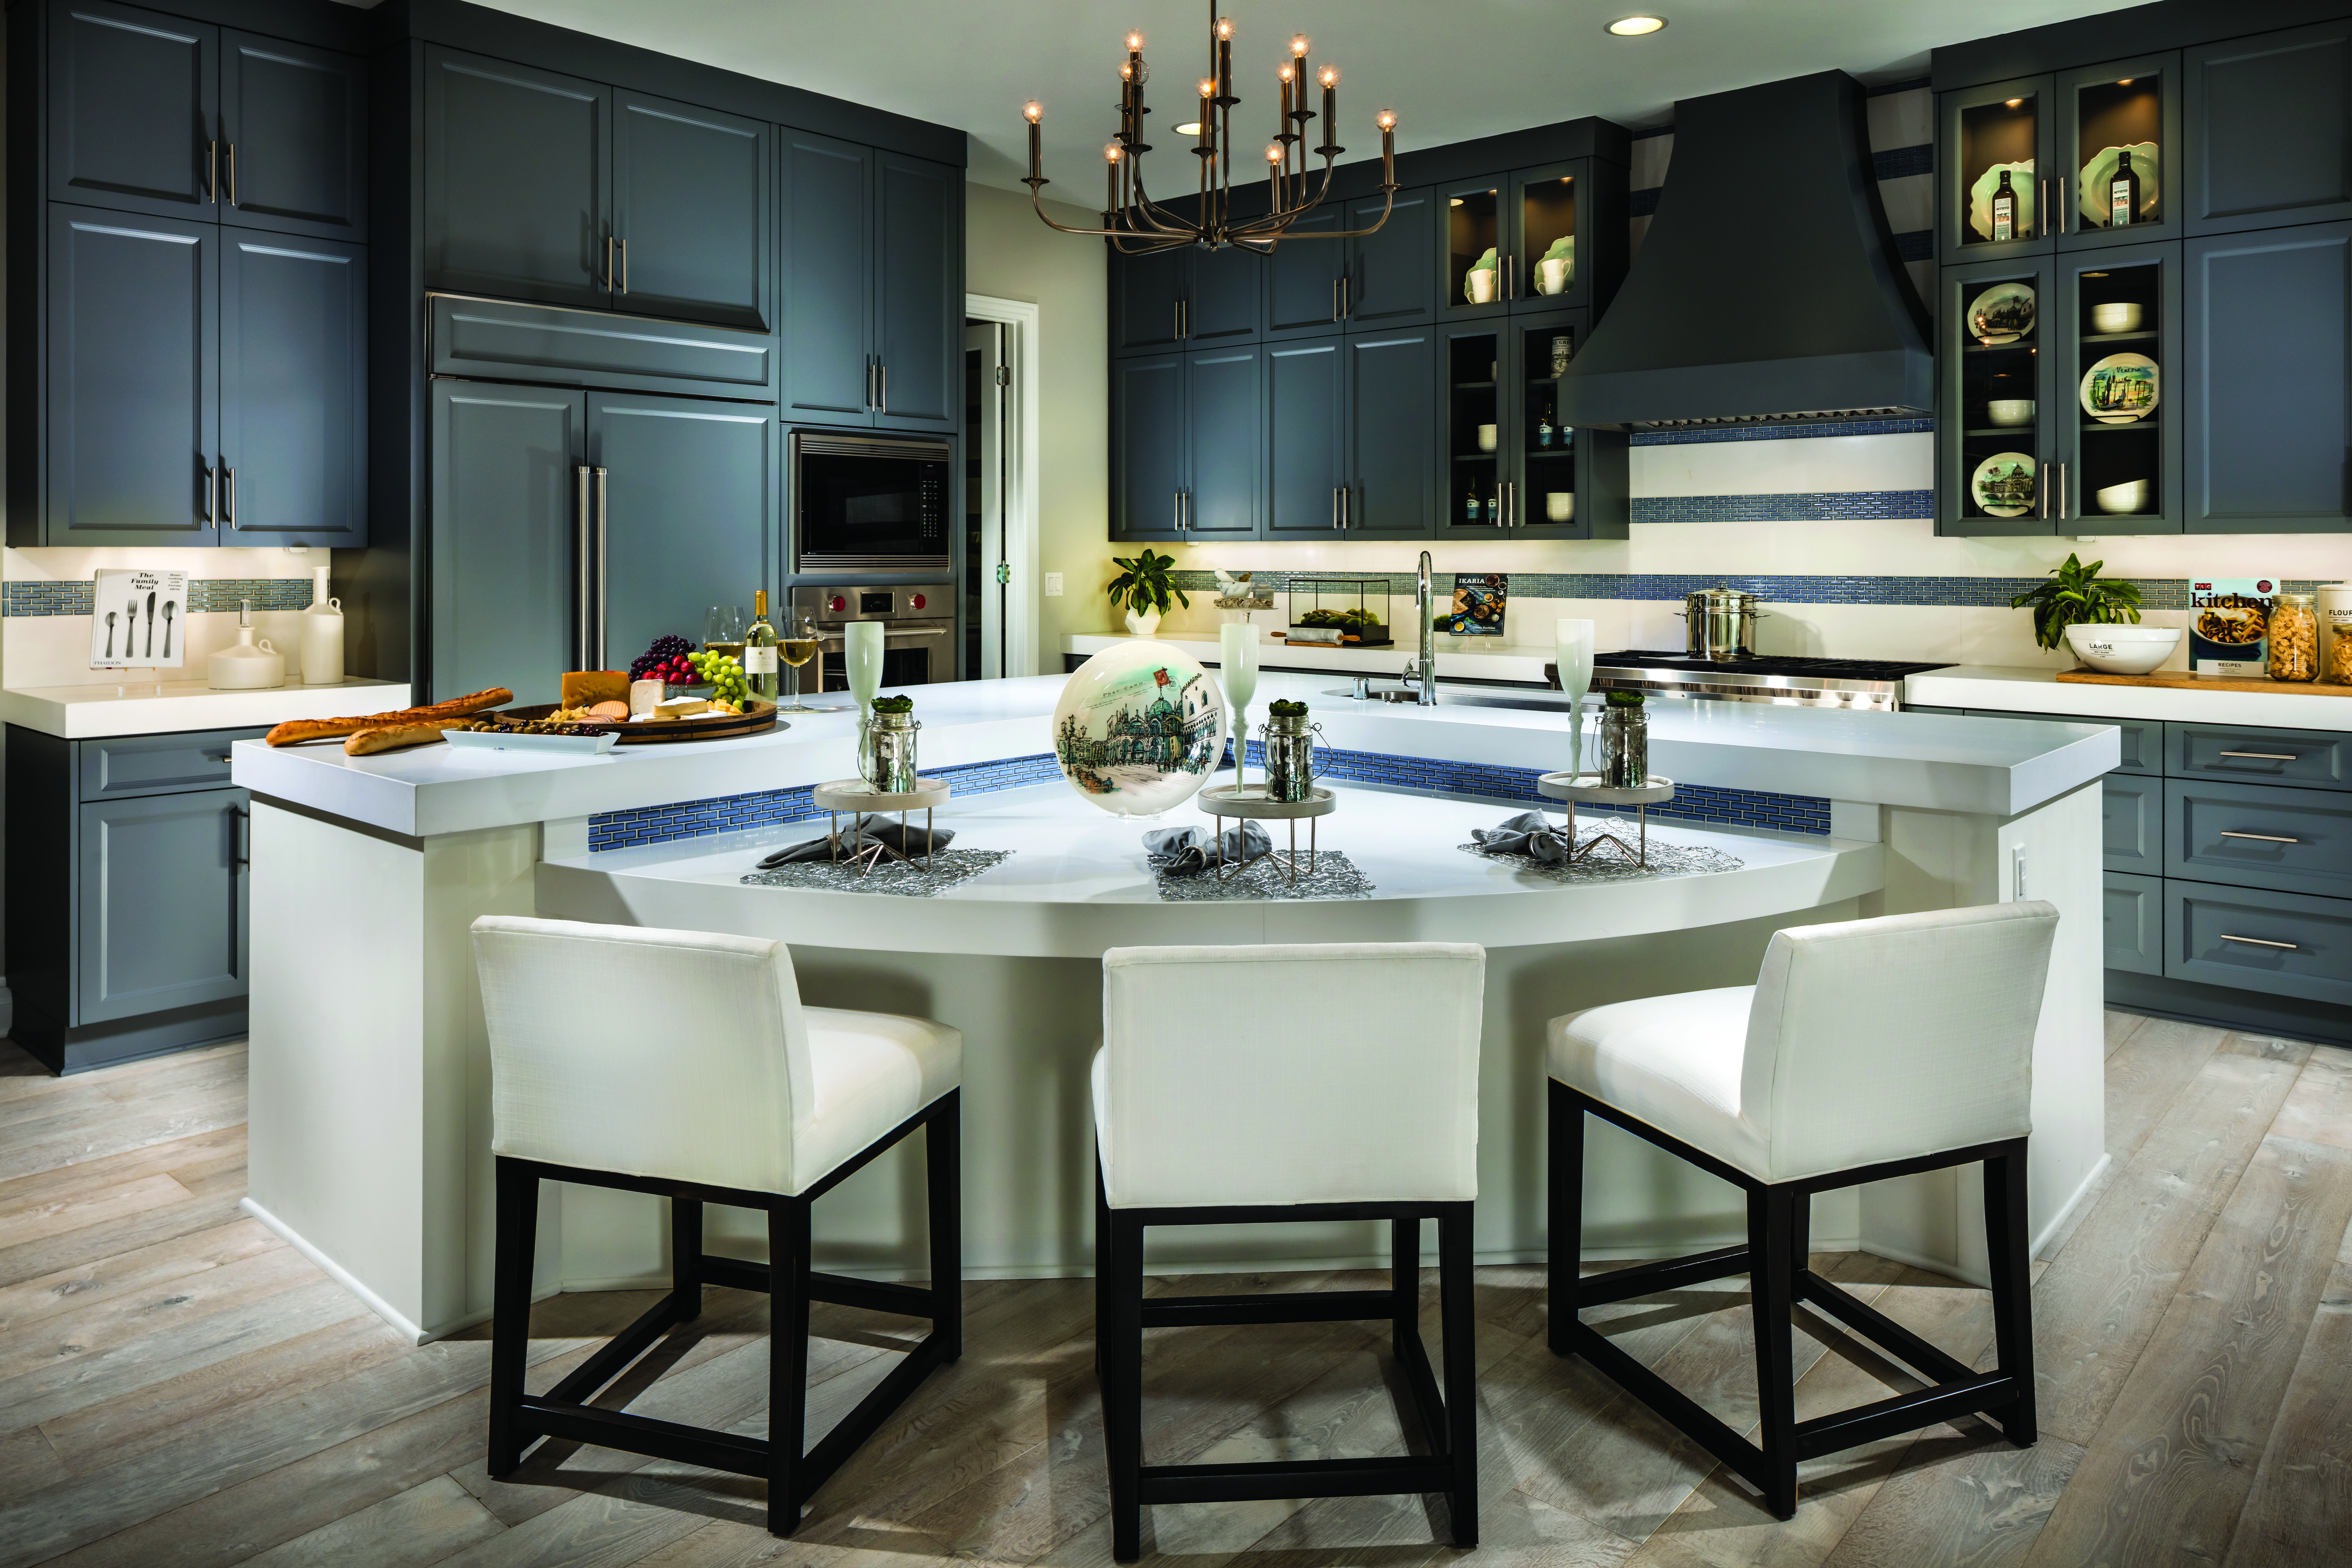 Kitchen with grey cabinets and bar stools around a center island.